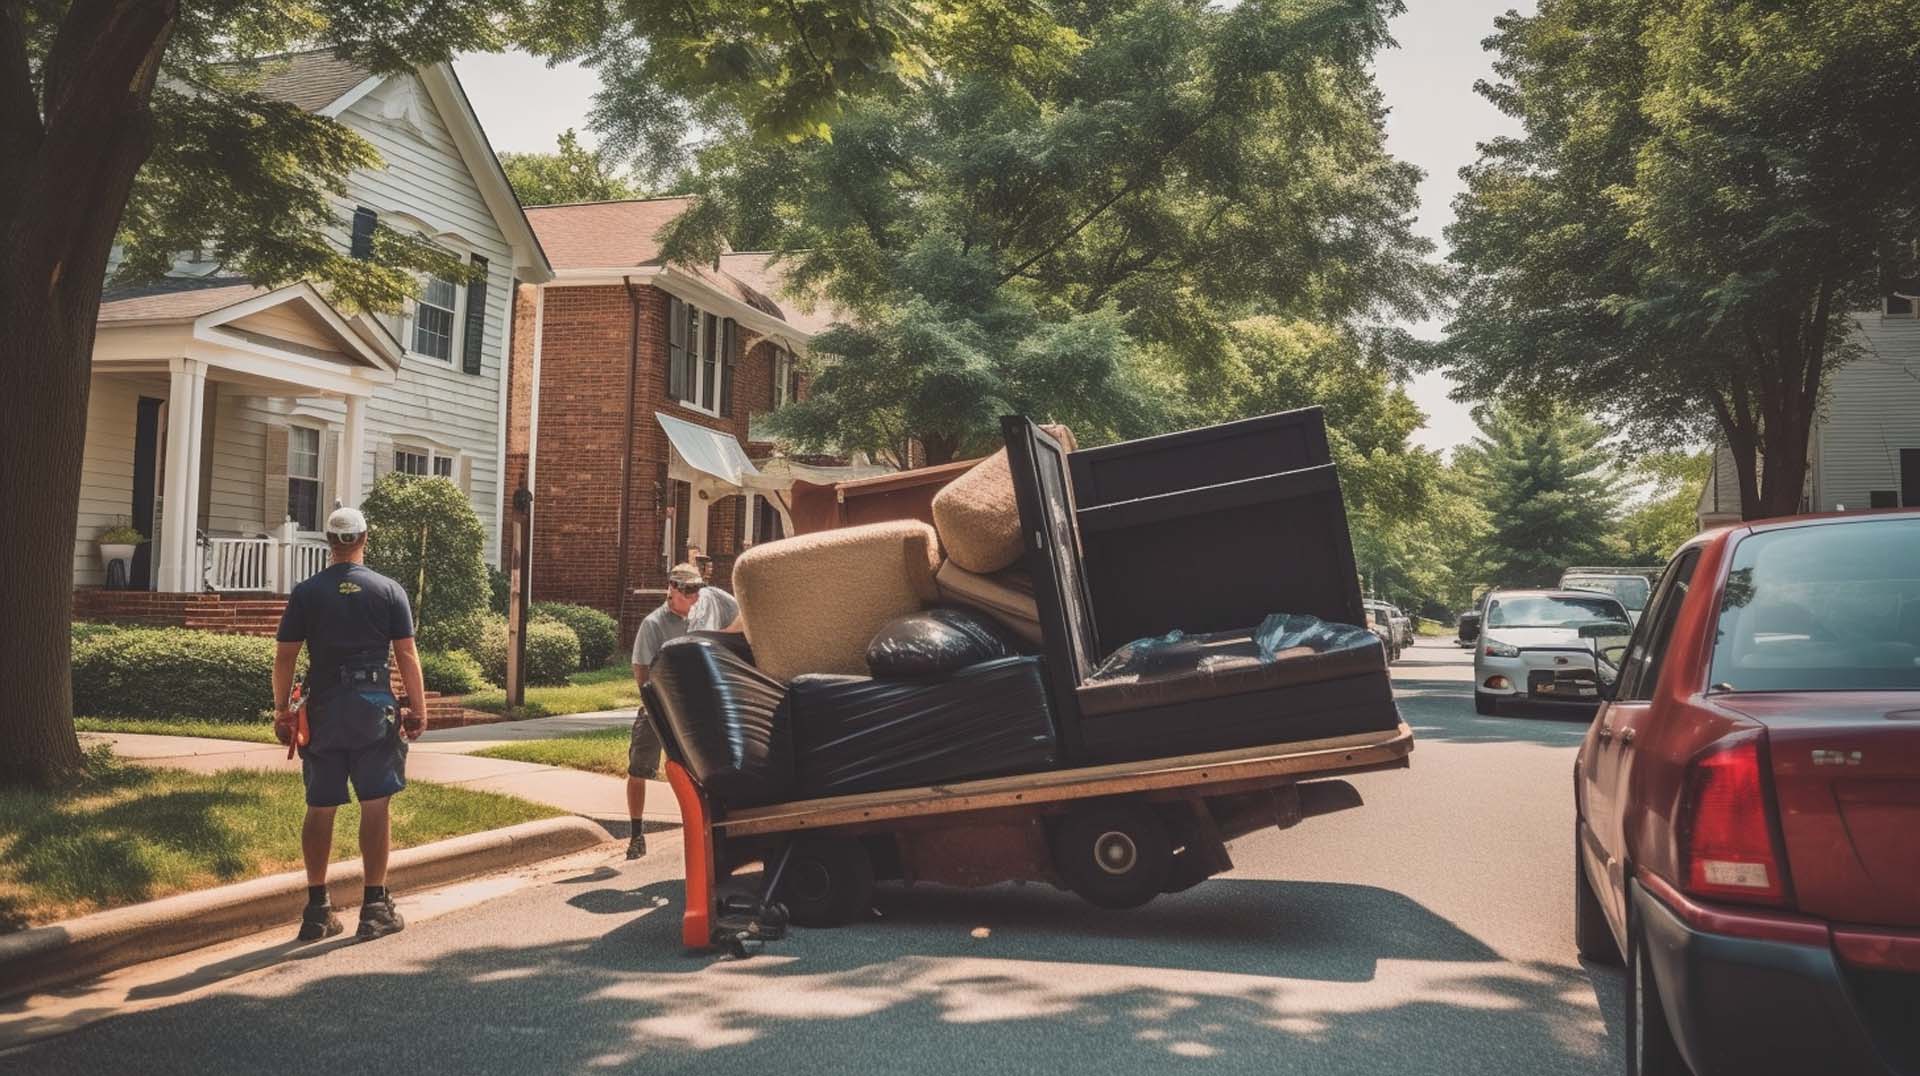 How to Find a Reputable Junk Removal Company in Longueuil, Quebec